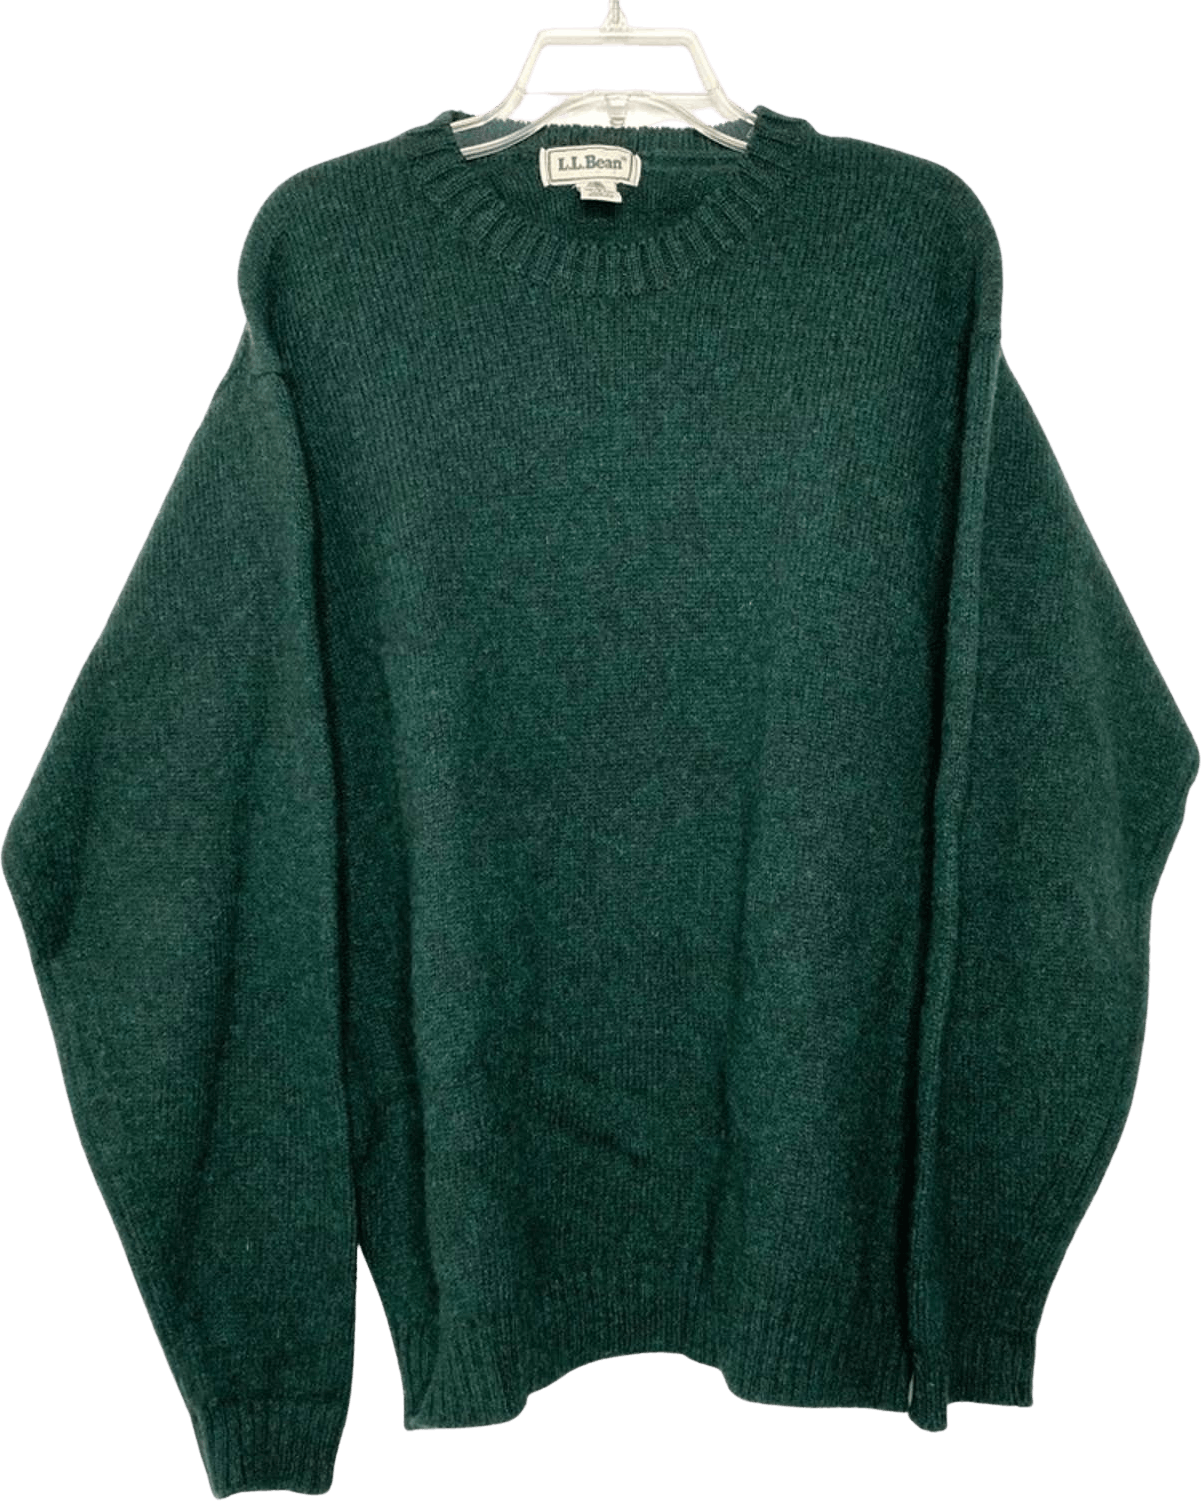 Vintage Green Wool Crew Neck Sweater by L. L. Bean | Shop THRILLING